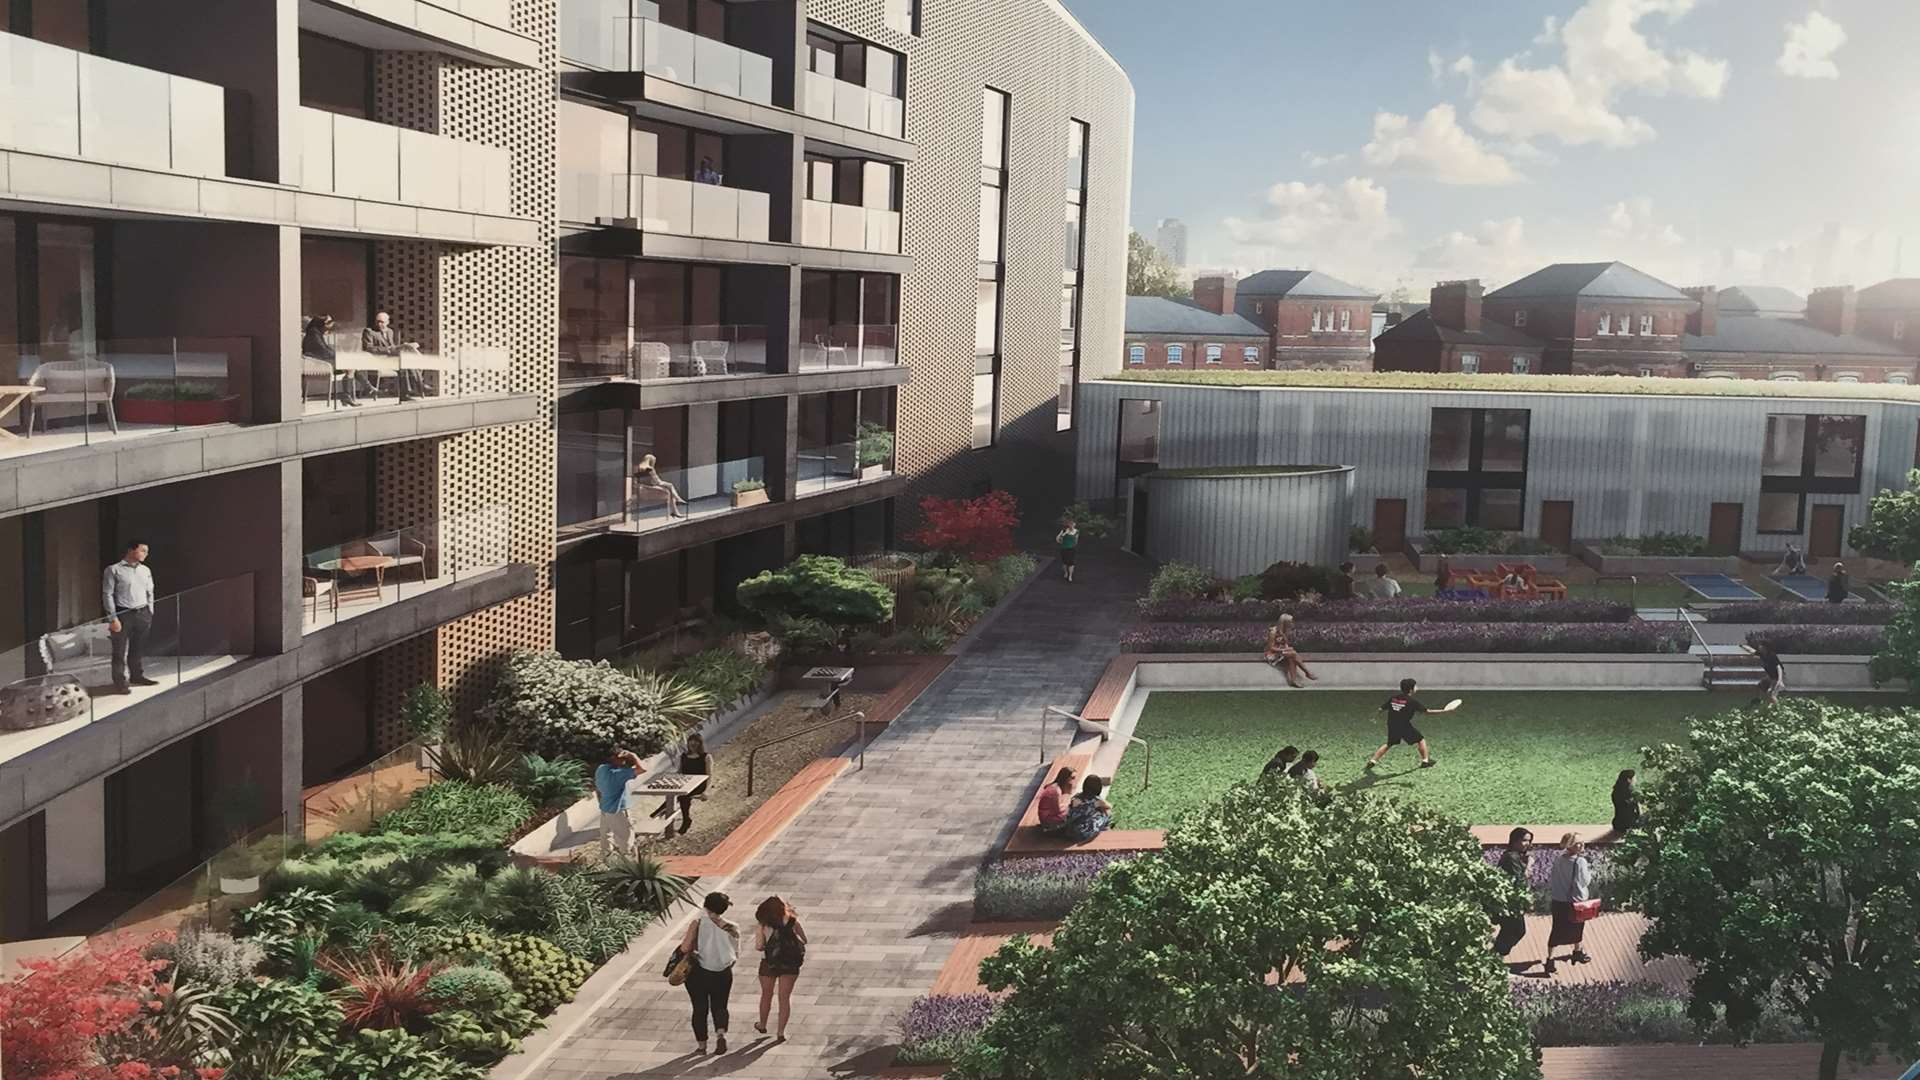 Artist impressions show what the flats could look like if approved